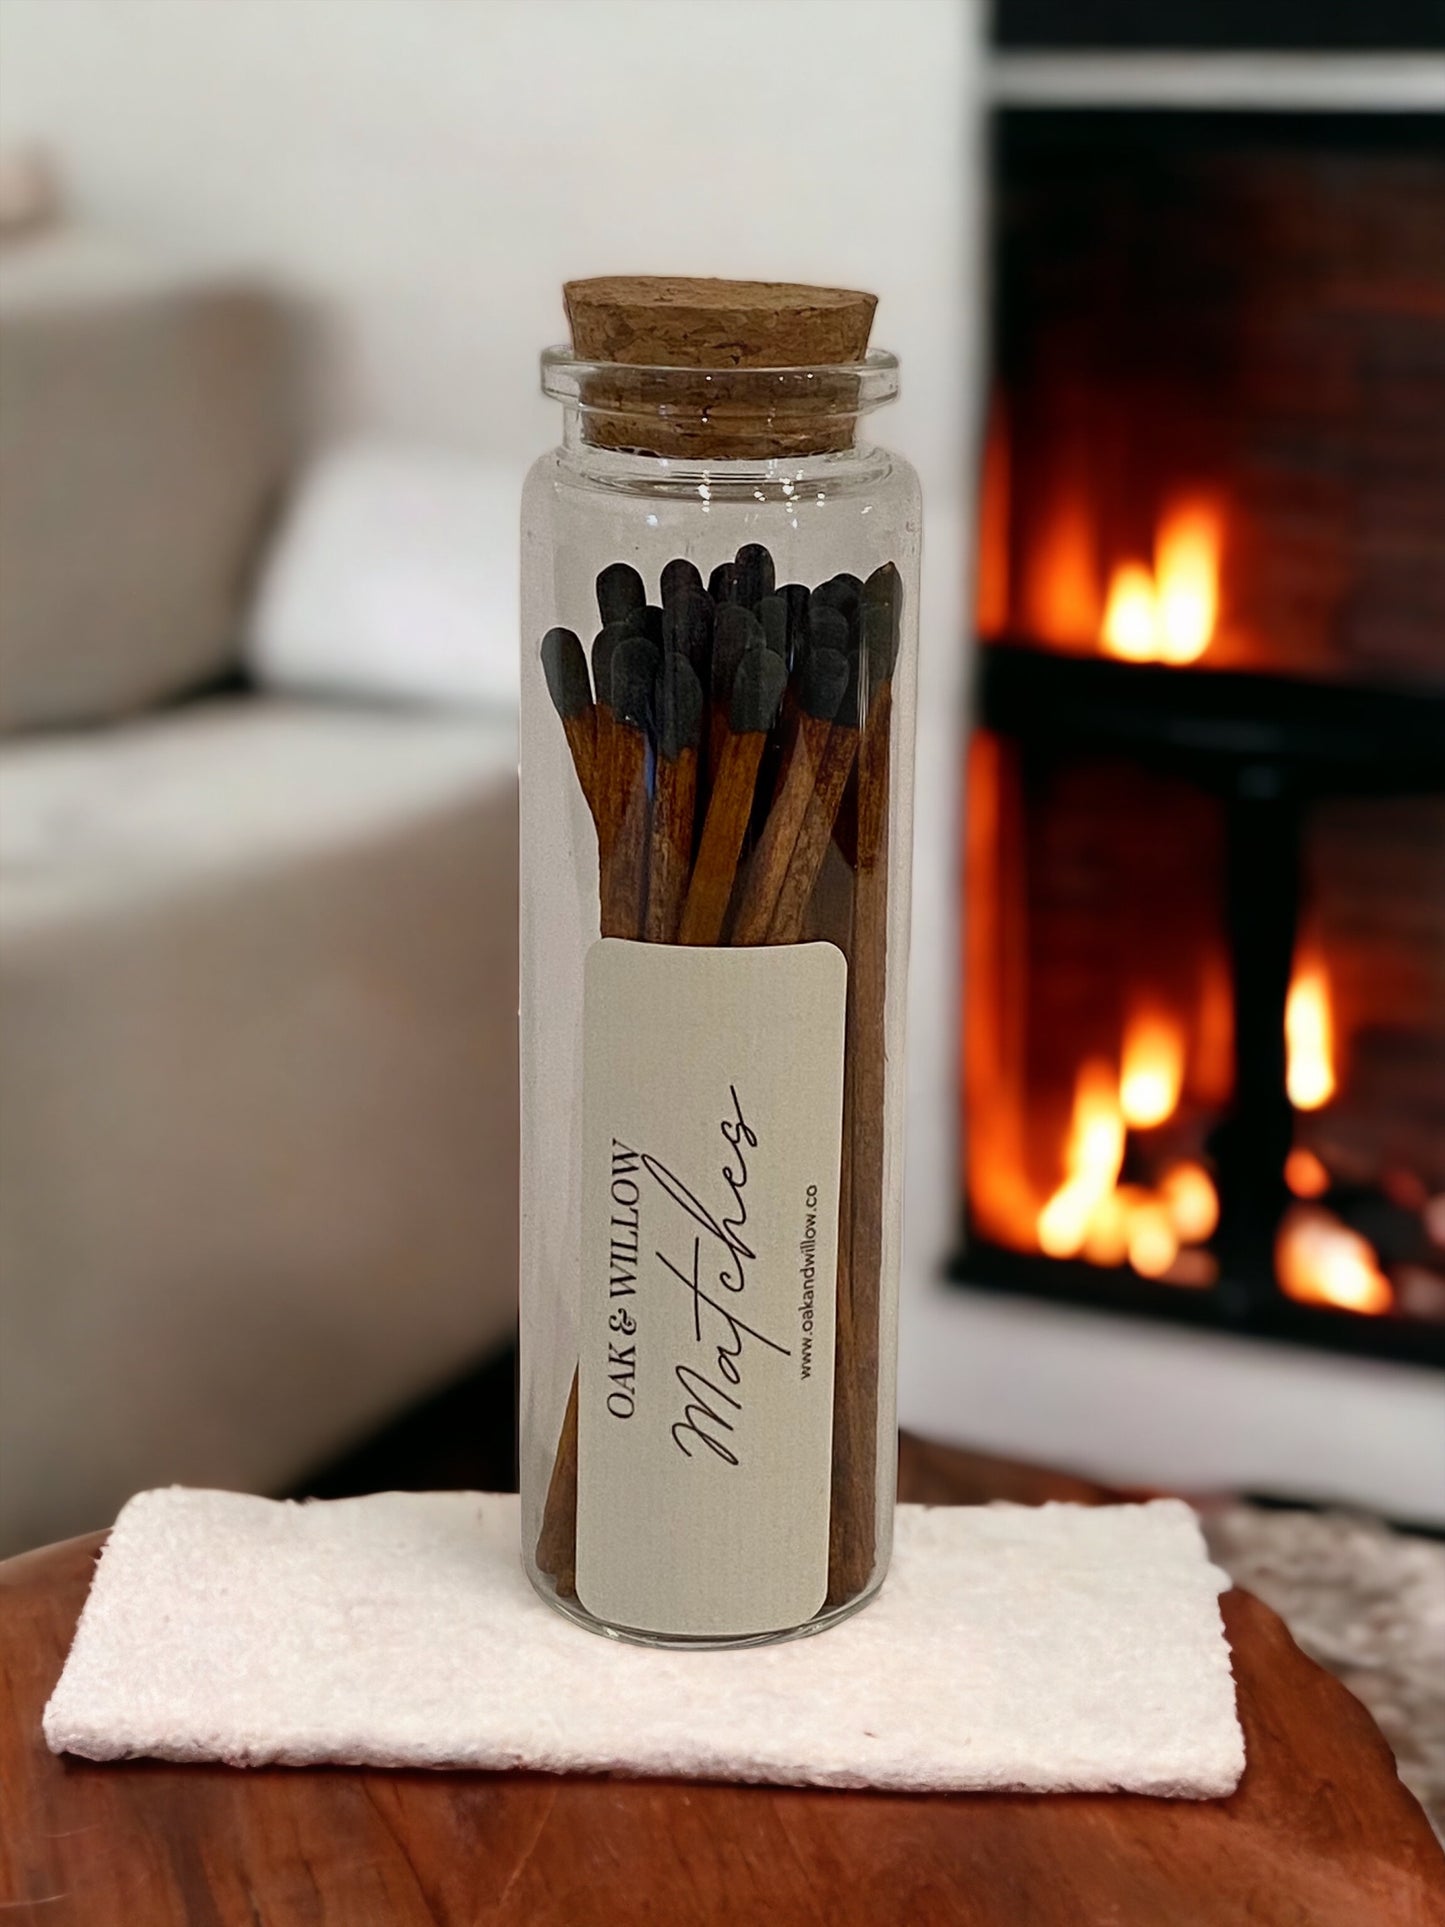 Rustic Cork Top, 25 pc Glass Vial Safety Match Set